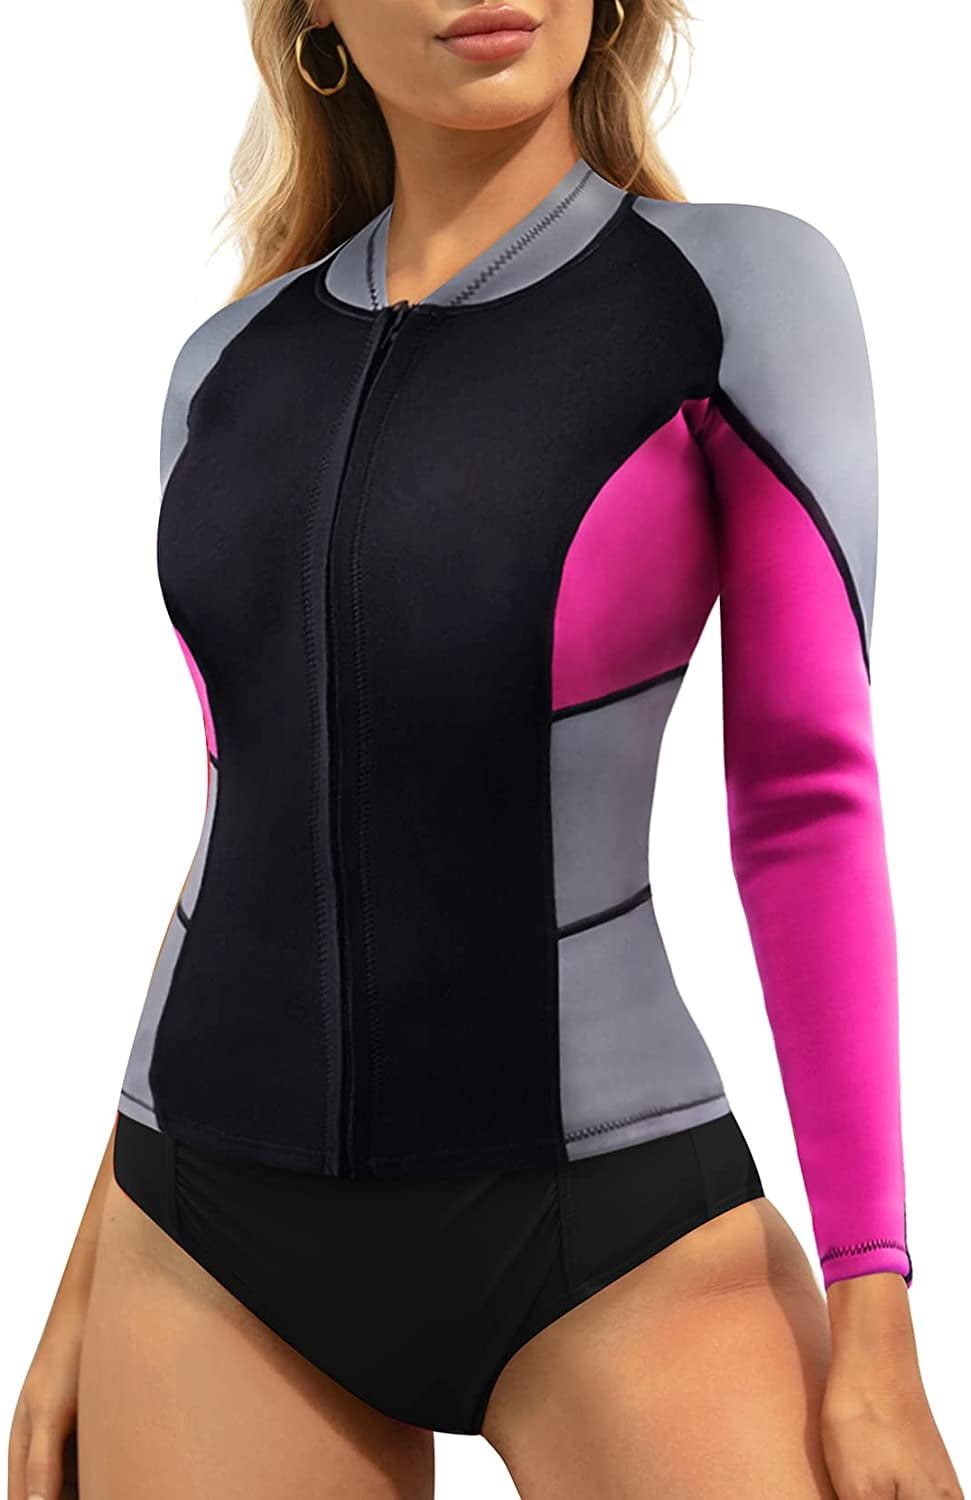 CtriLady Wetsuit Top 1.5mm High-Necked Women Wetsuit Long Sleeve Jacket Neoprene Wetsuits with Front Zipper for Swimming Diving Surfing Boating Kayaking Snorkeling 